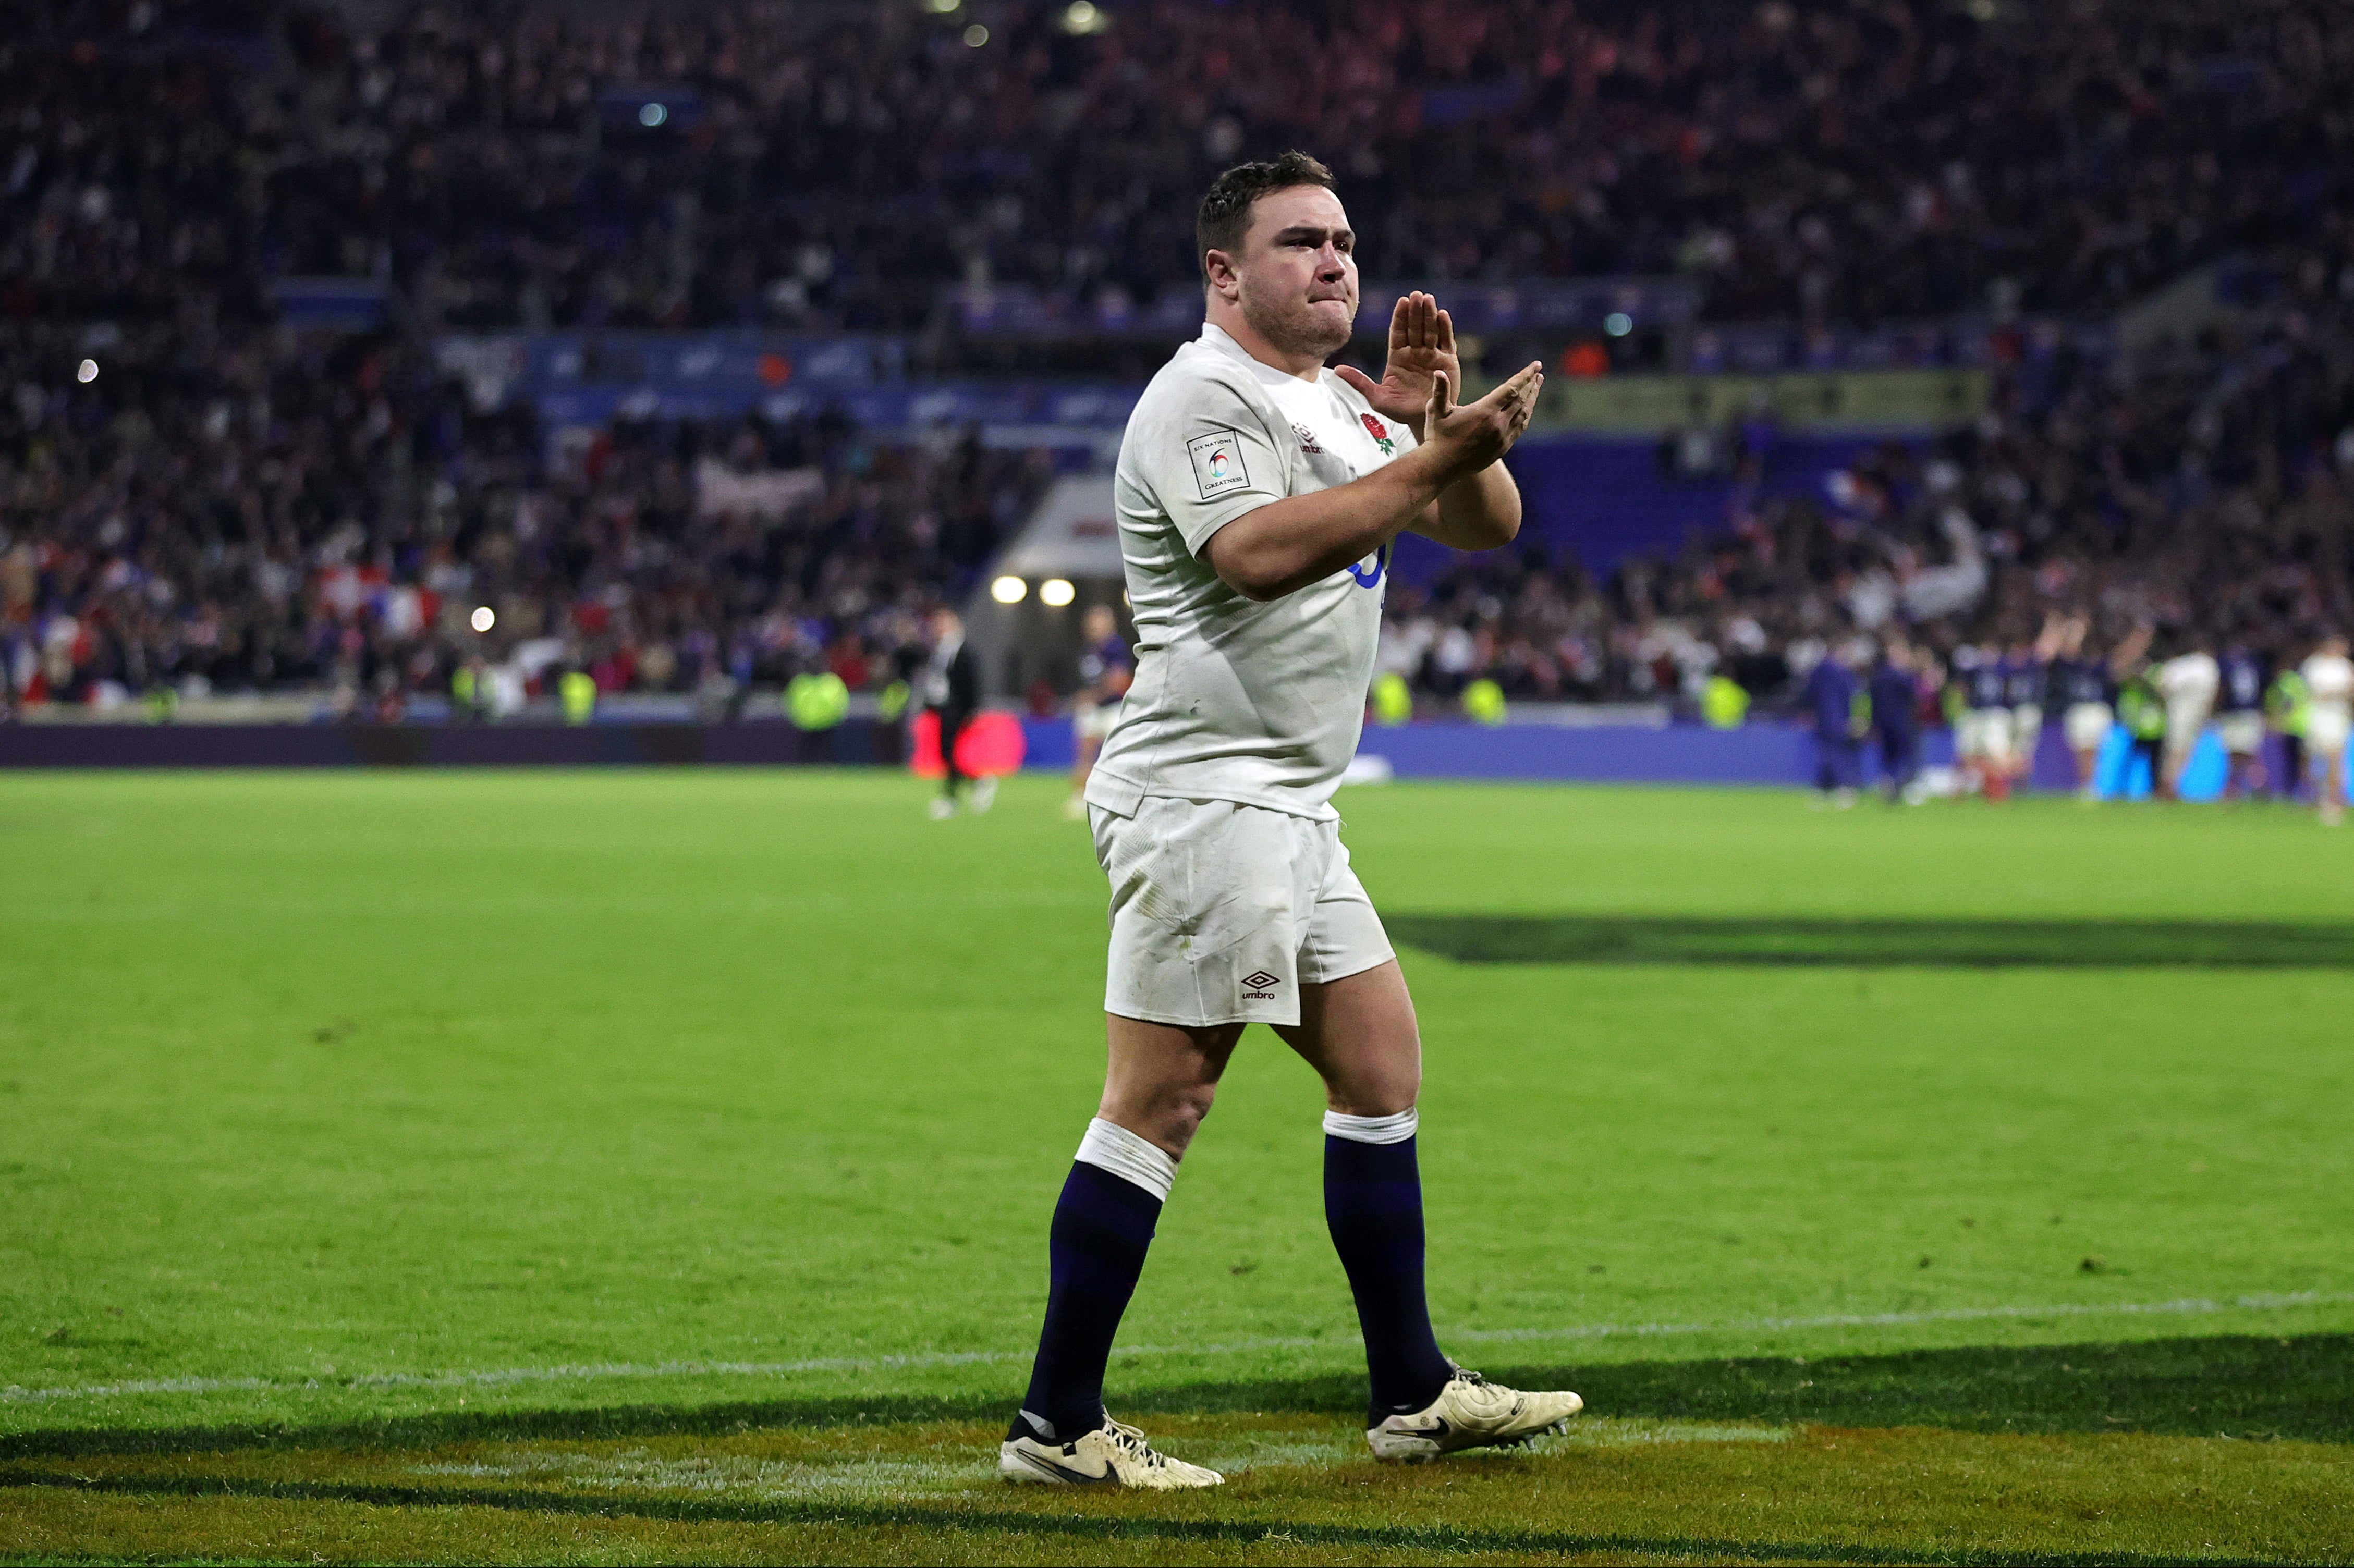 Jamie George led England impressively in this campaign